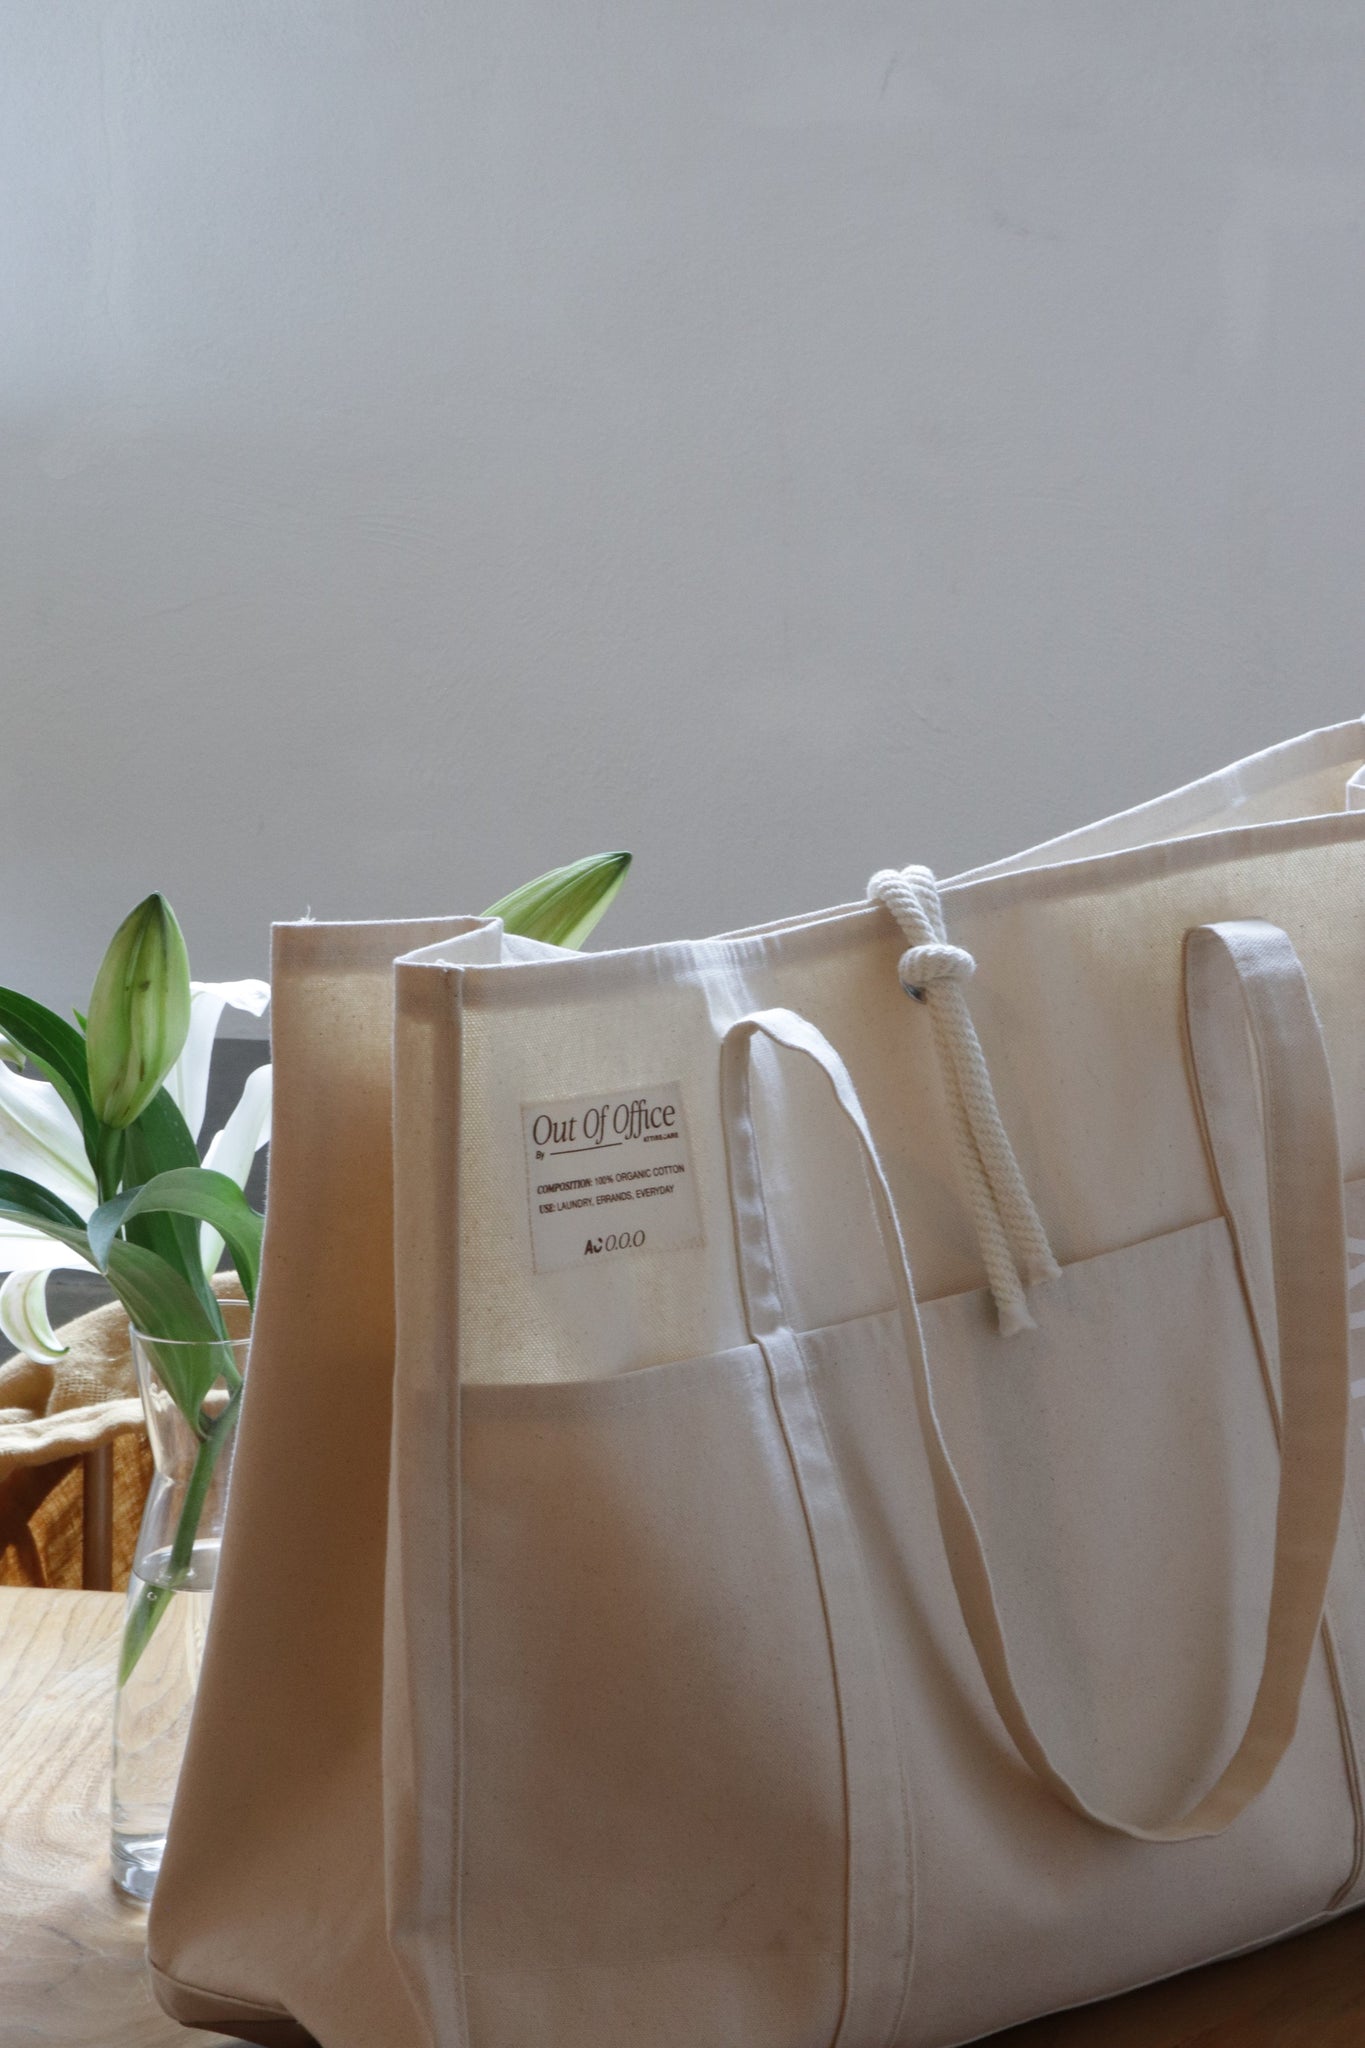 The Laundry Tote ANTIQUE // One Size